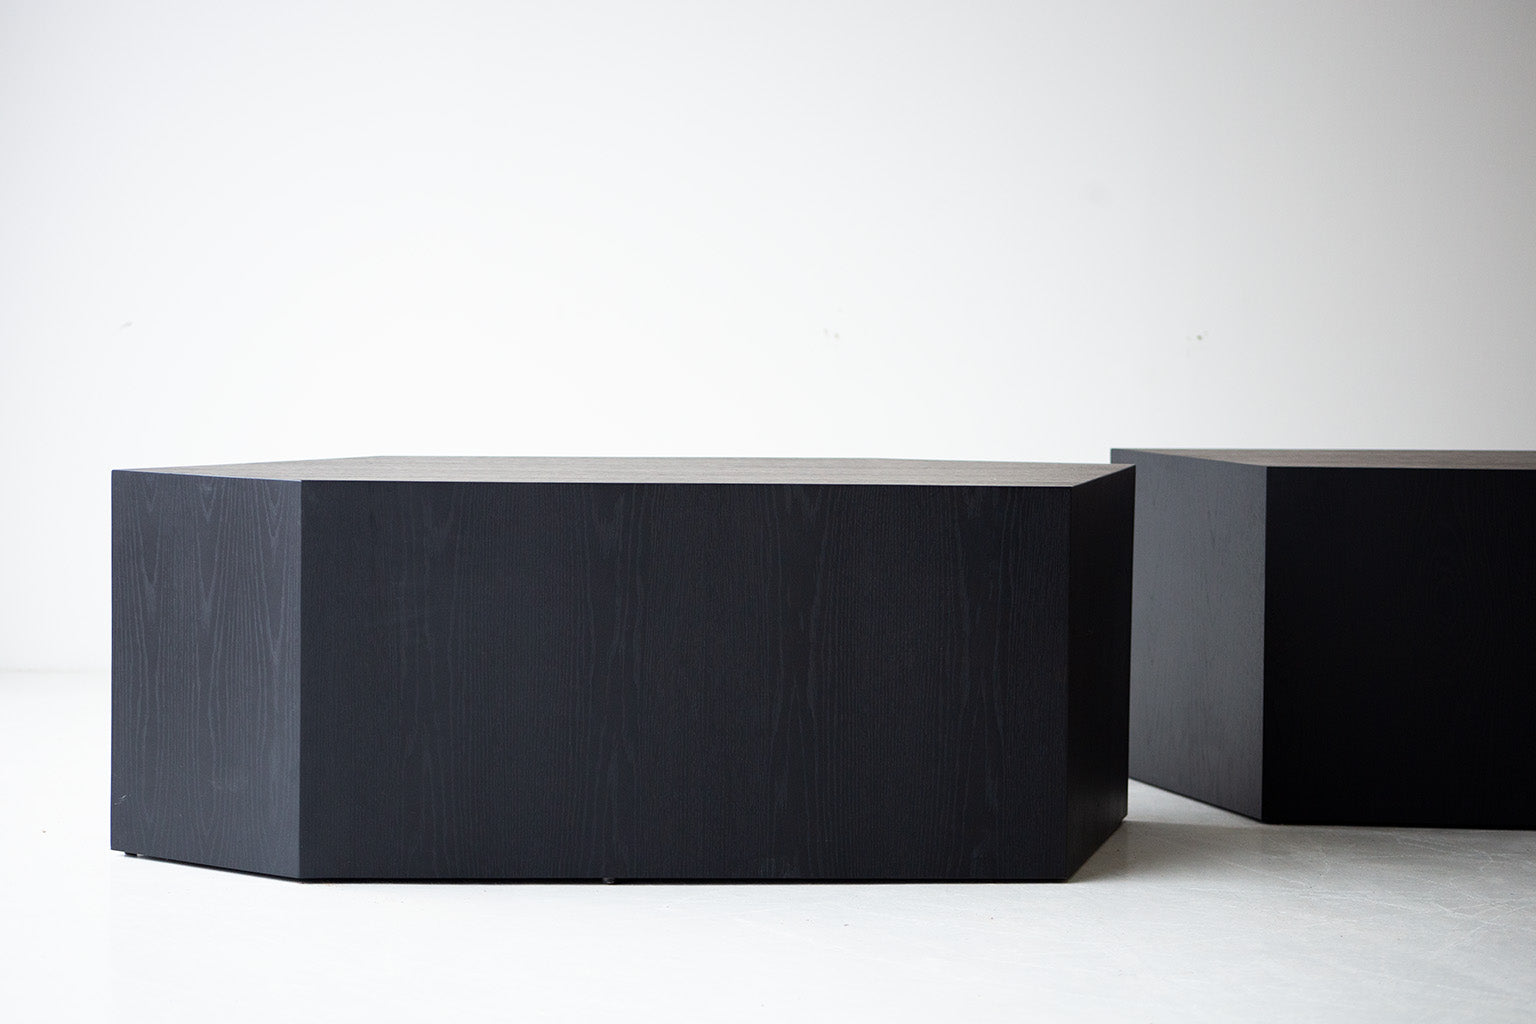 Modern Coffee Table - The Crag Tables - 1422